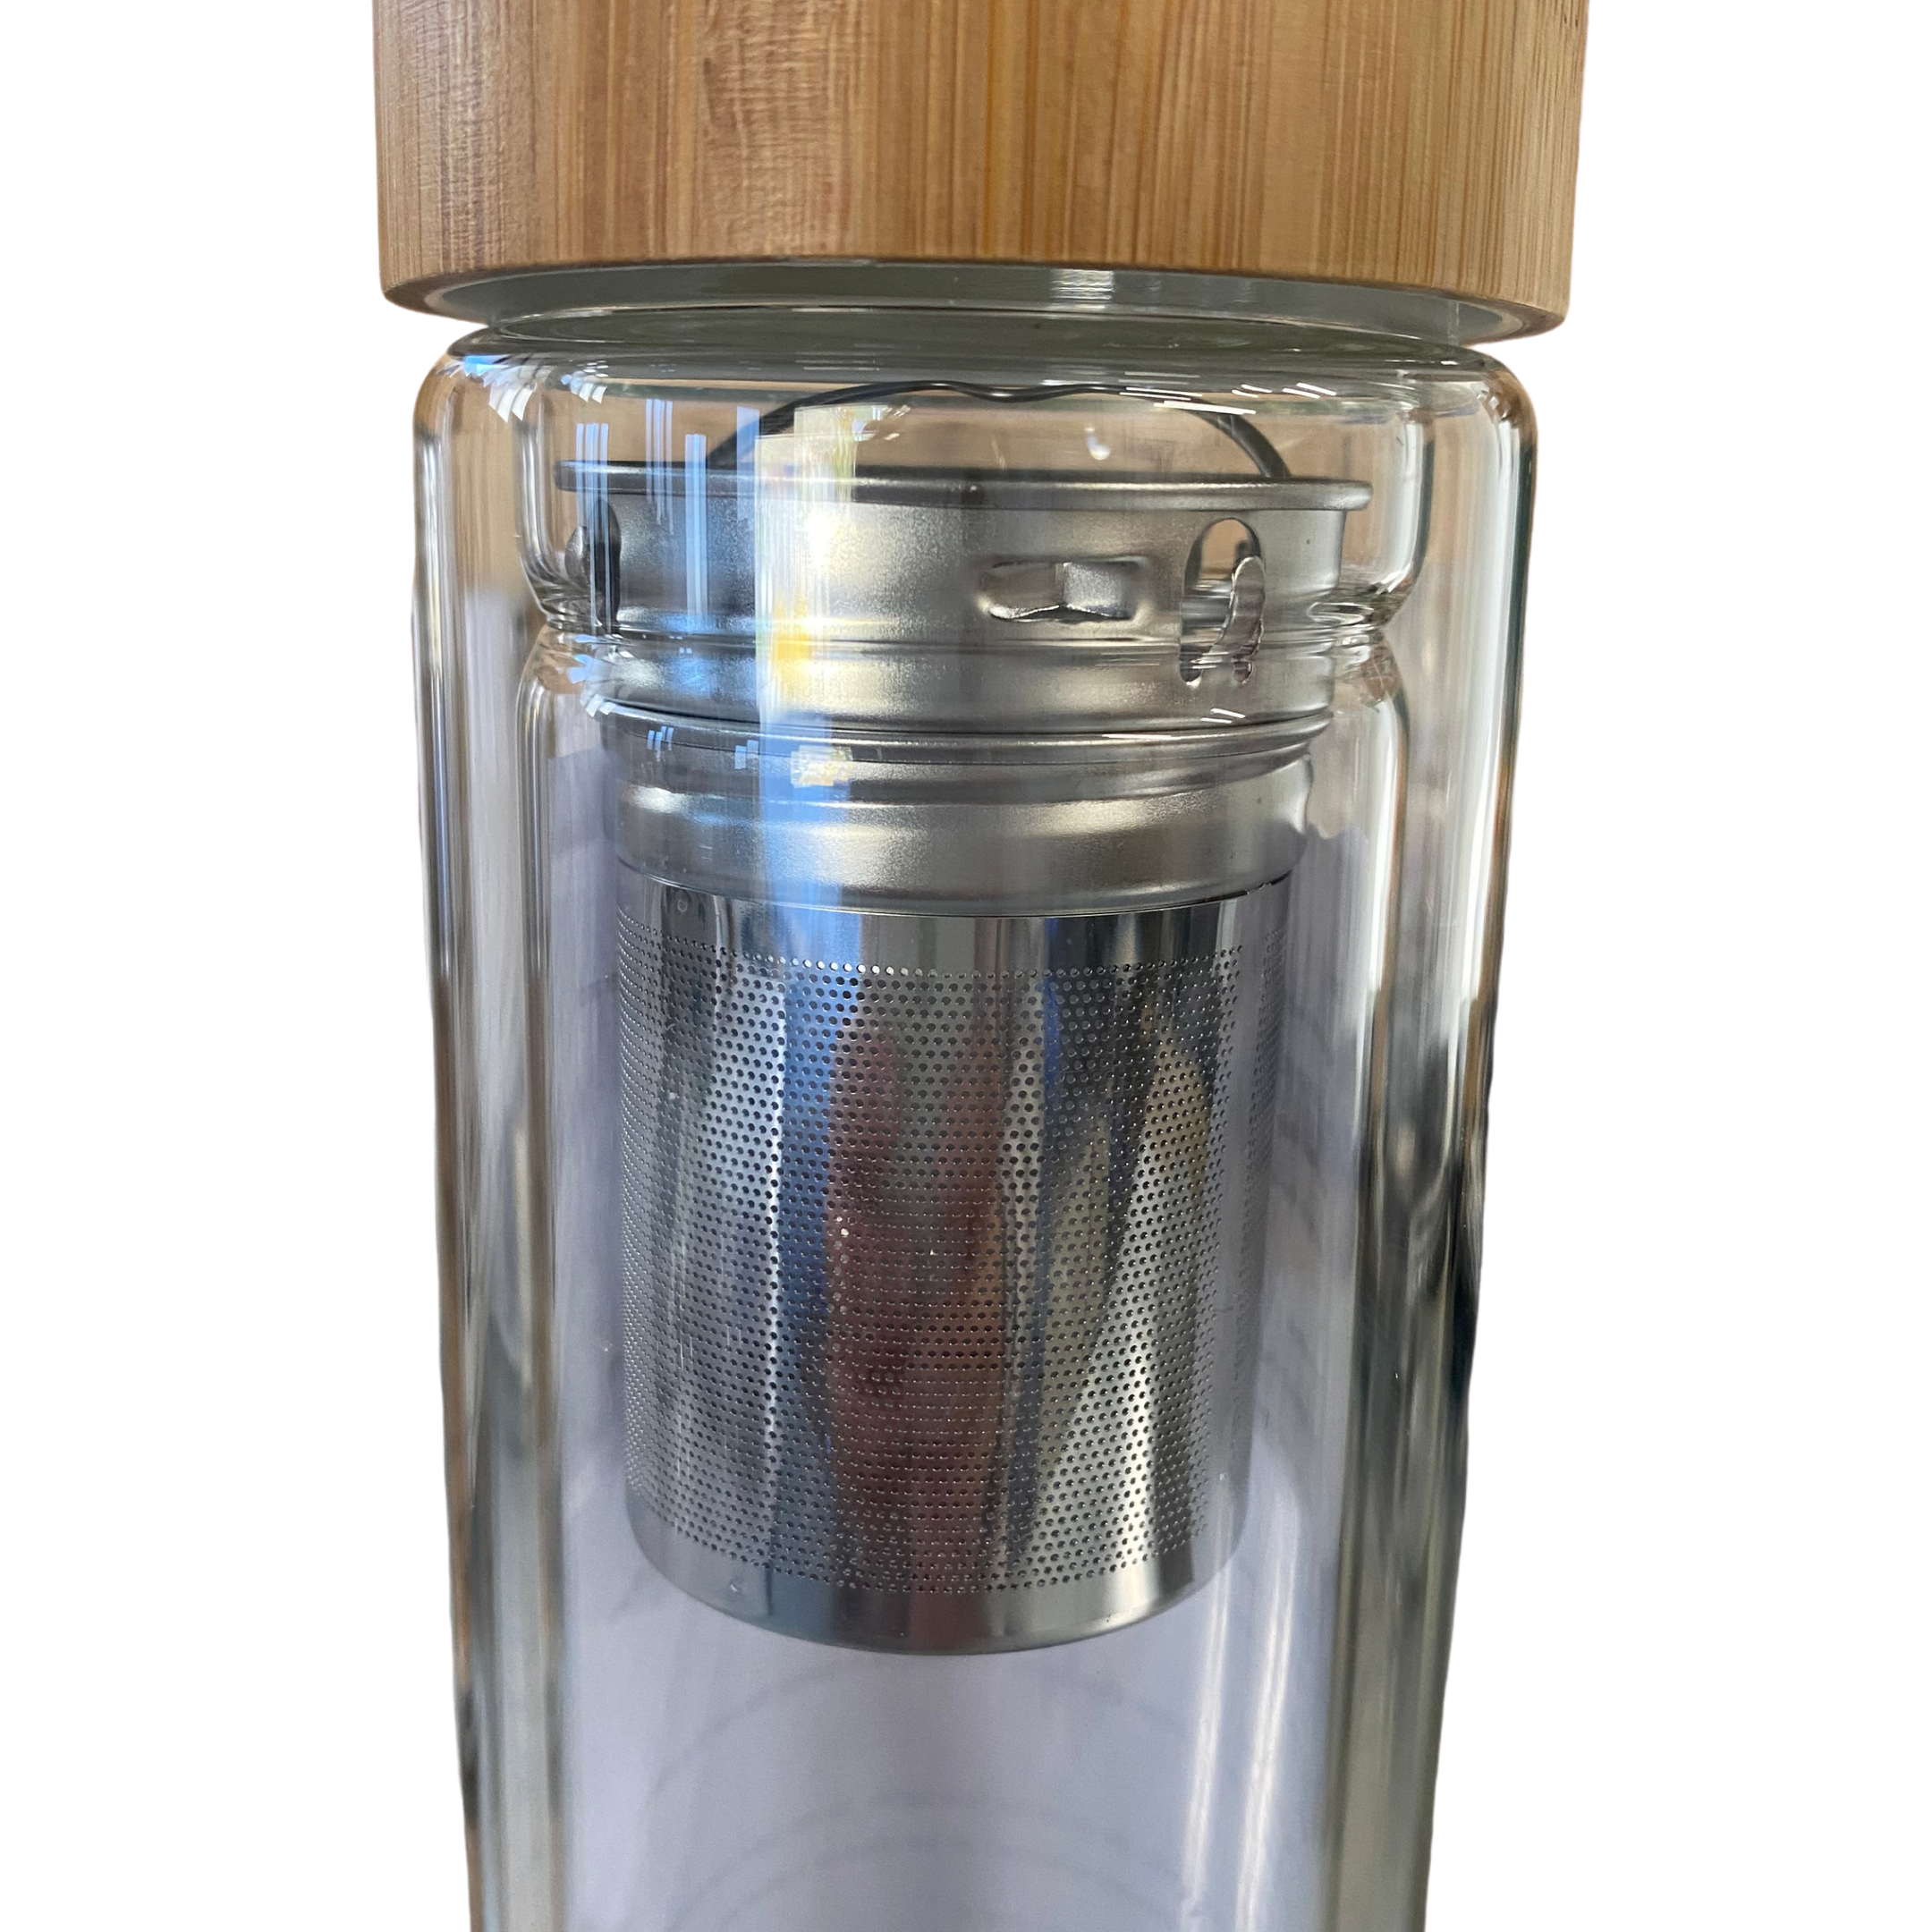 Glass Brew Tower - portable drink bottle brewer for tea.